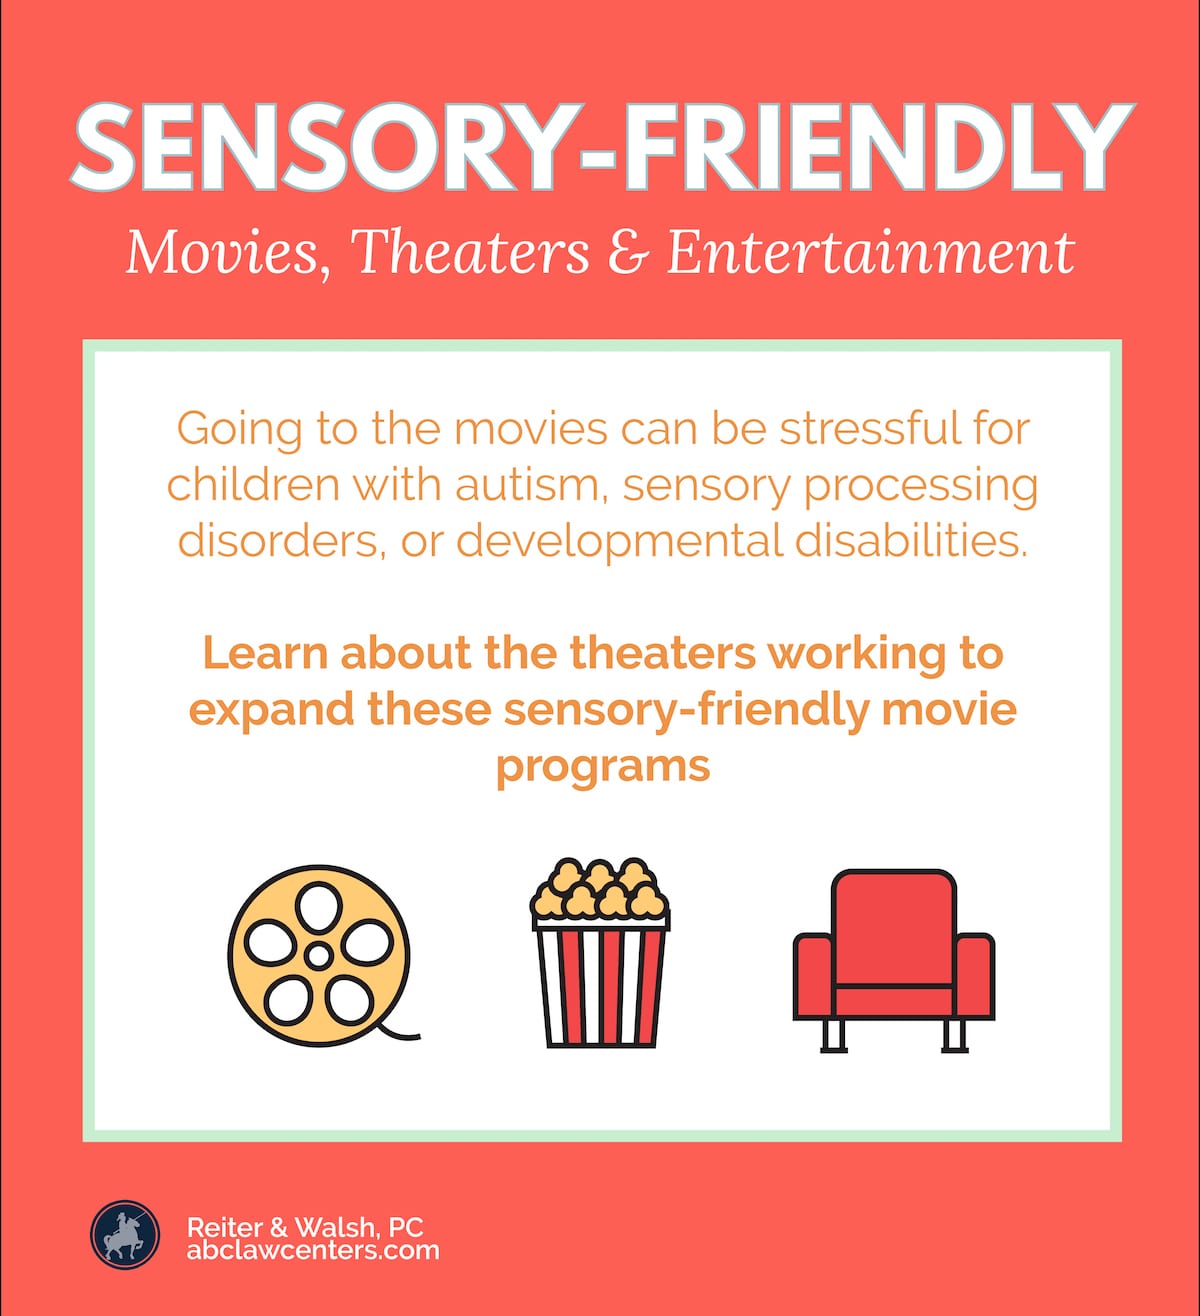 Sensory-friendly movies, theaters, and entertainment